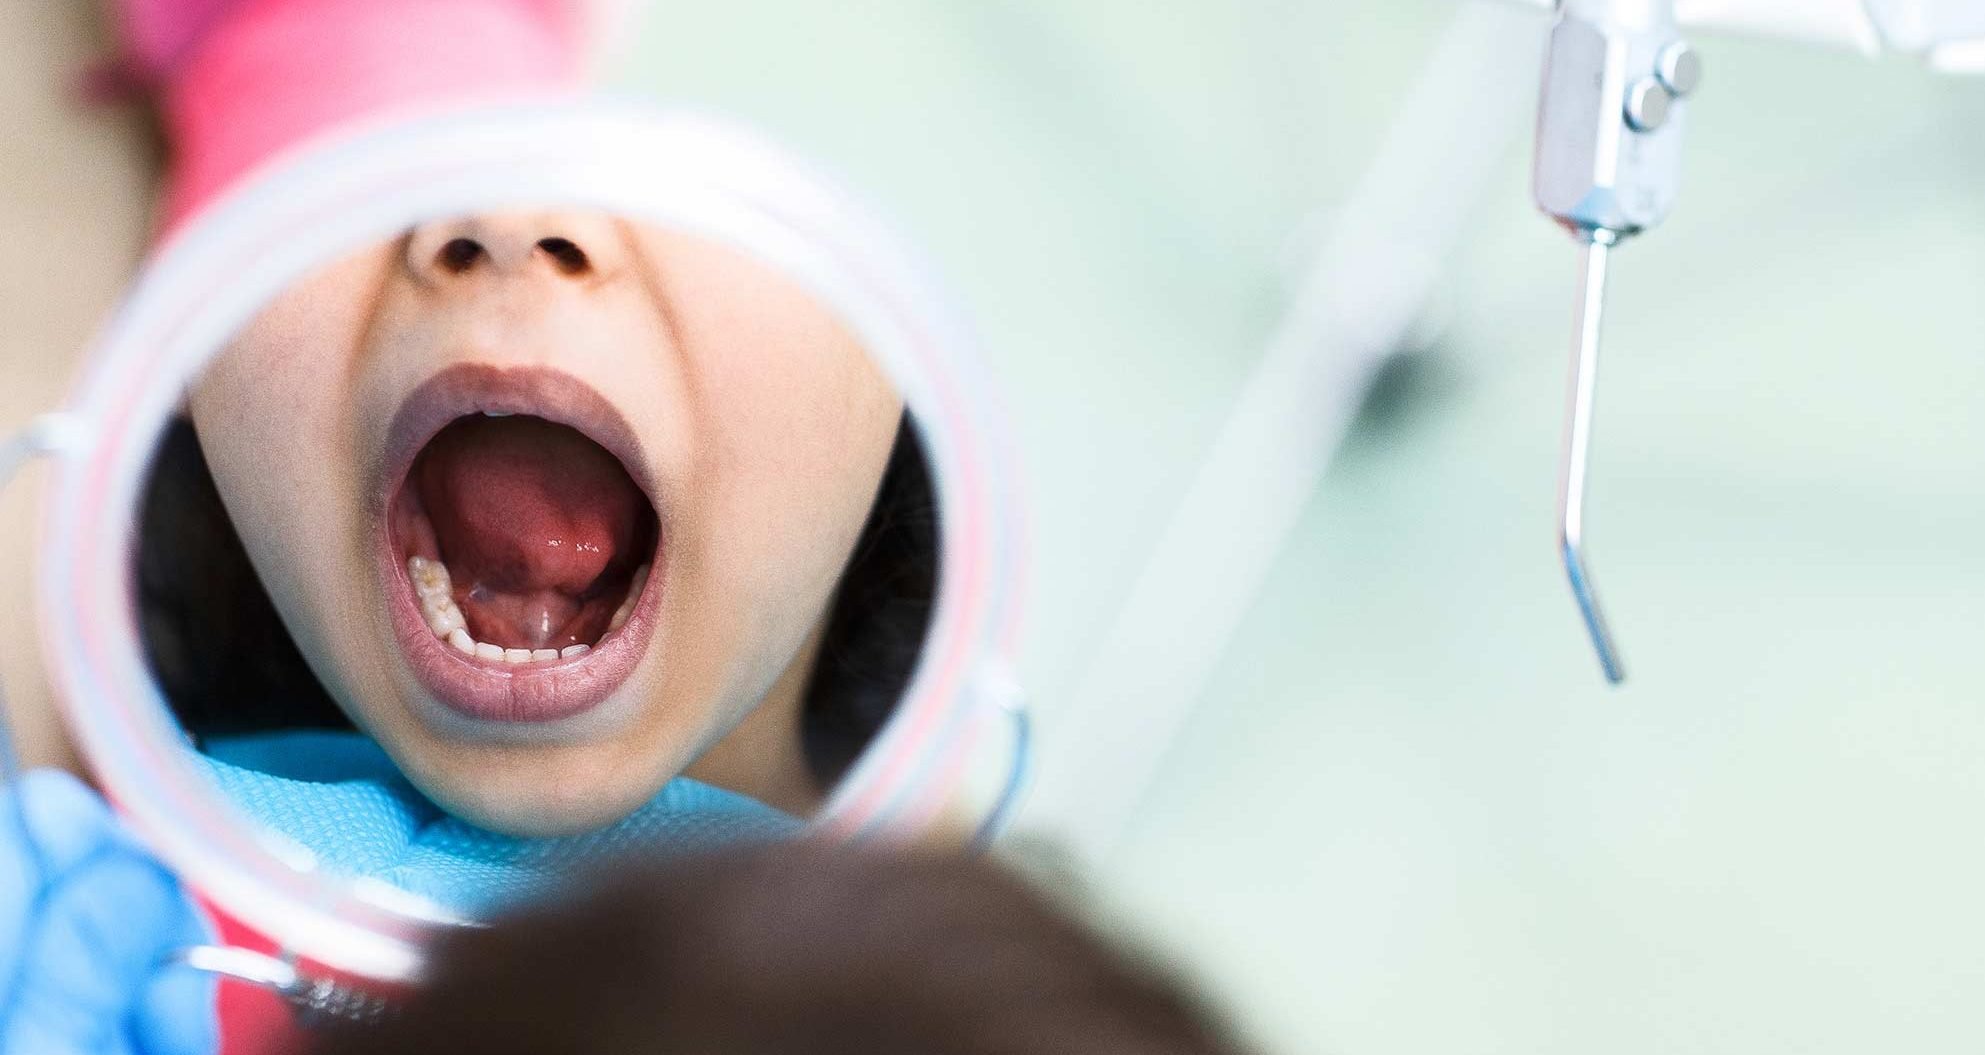 Children’s Oral Health Deteriorating Due To Covid Focus: Can Dentists Help?